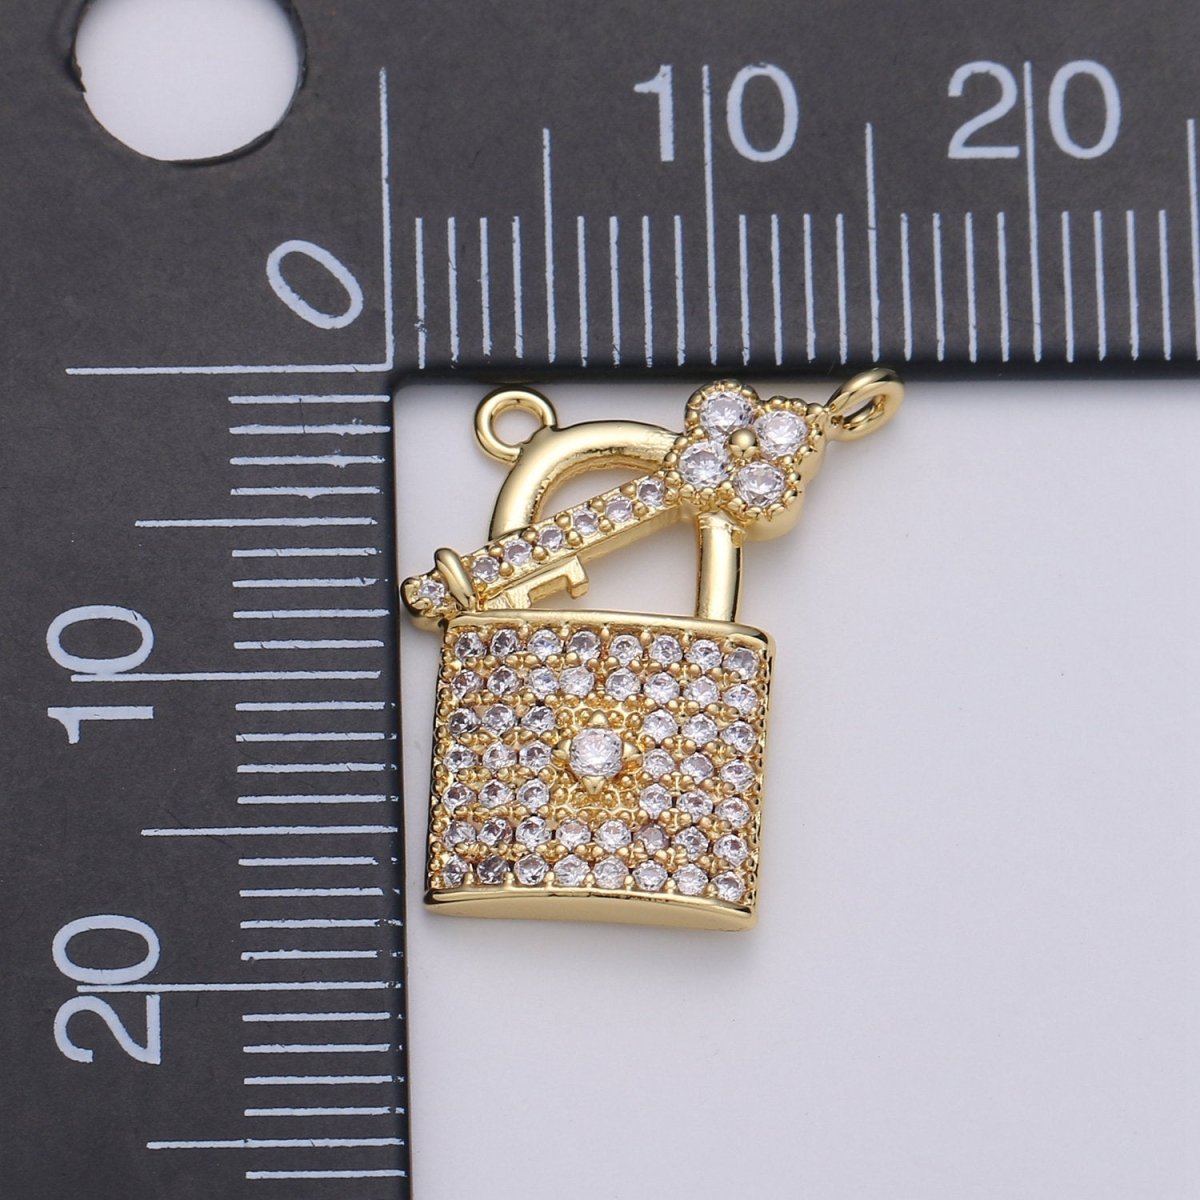 24k Gold Filled Padlock and Key CZ Micro Pave Charm Pendant Lock and Key Charm Necklace for Statement Necklace Component D-617 - DLUXCA